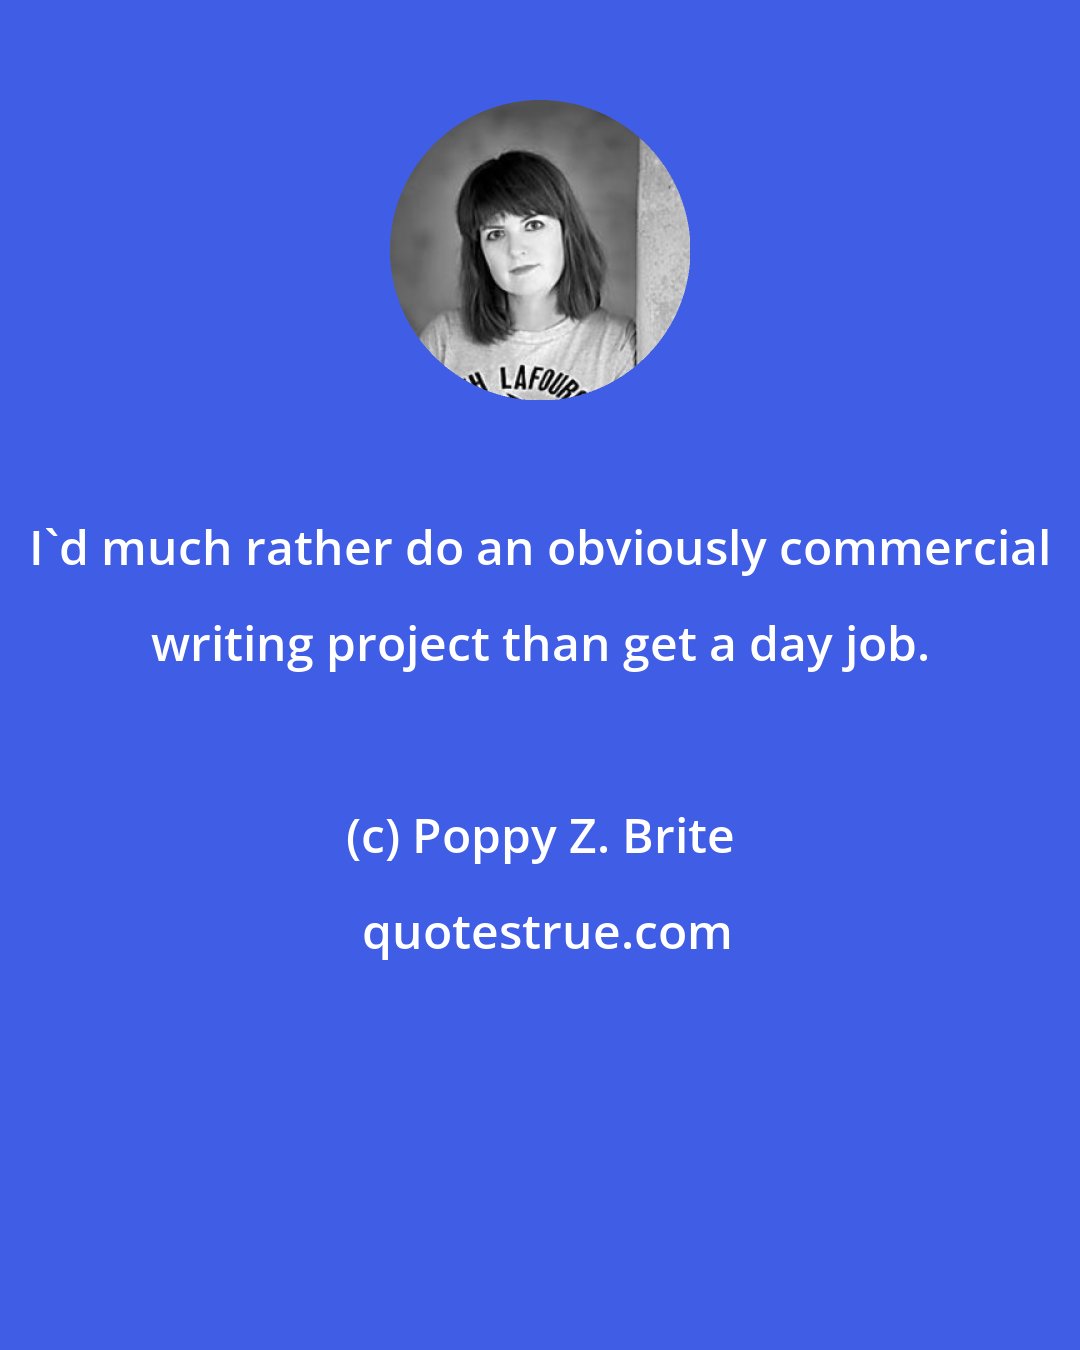 Poppy Z. Brite: I'd much rather do an obviously commercial writing project than get a day job.